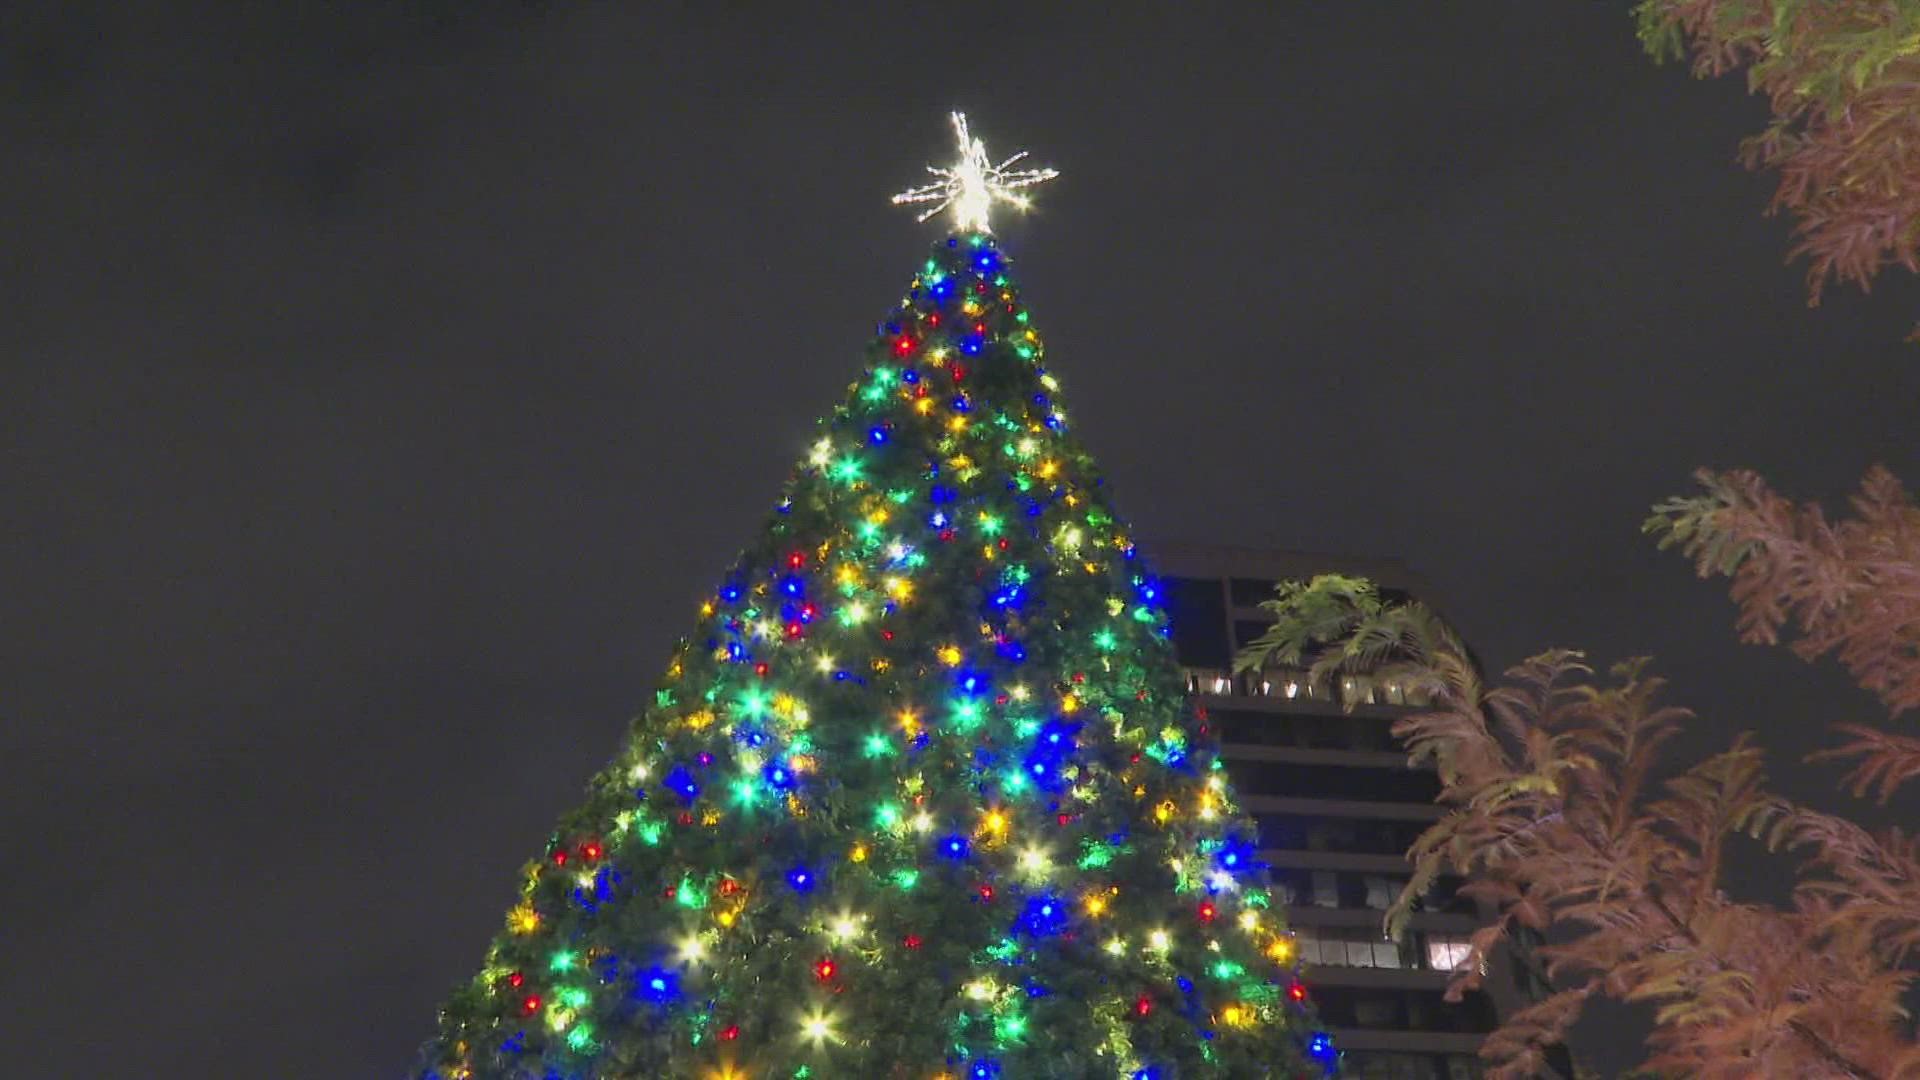 The city lit up its Christmas tree and held performances up and down Elm Street.